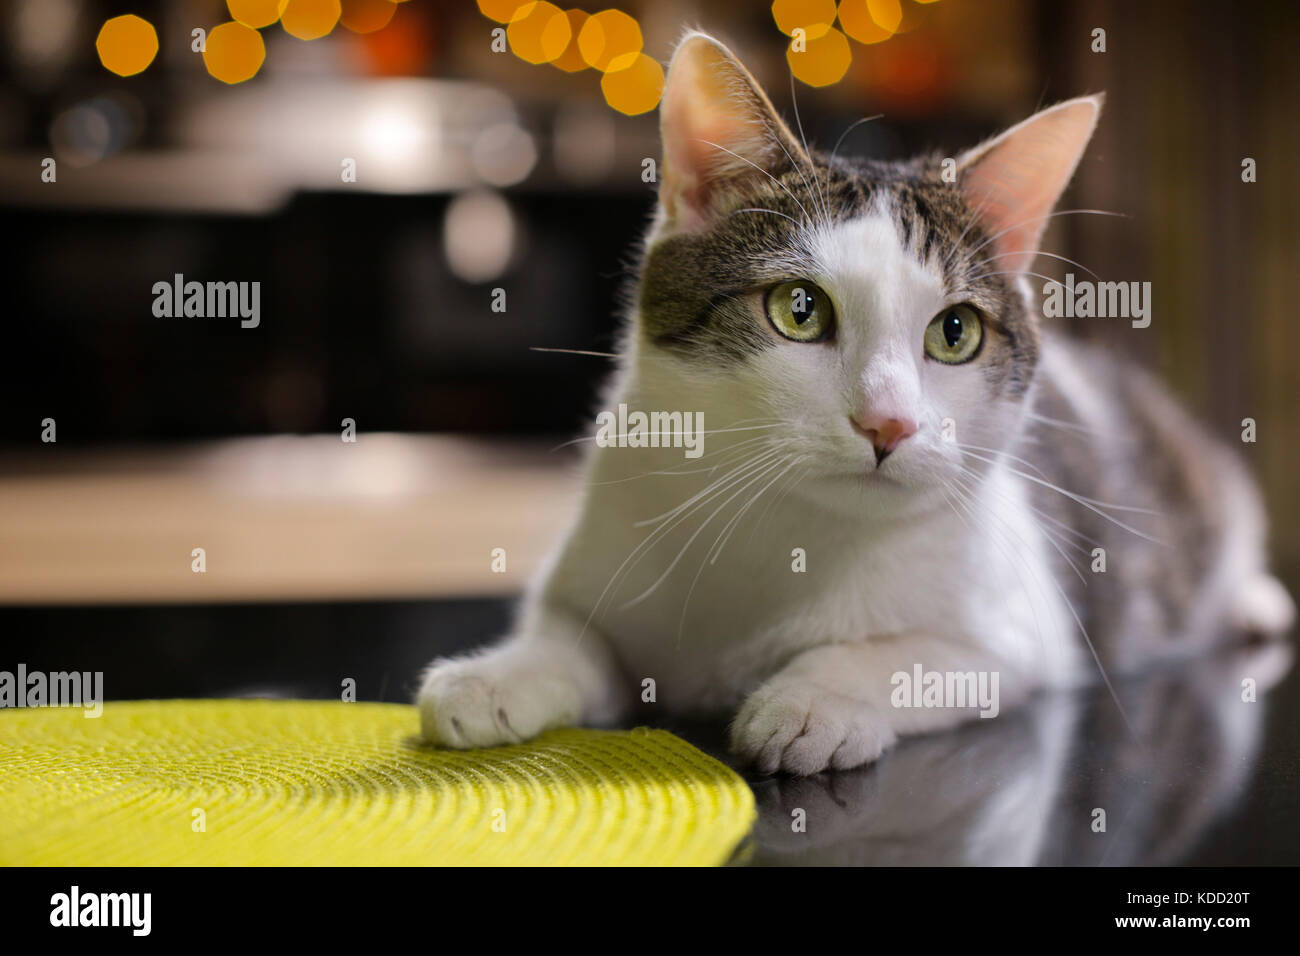 Lovely cat is lying on the black stone desk in the kitchen Stock Photo